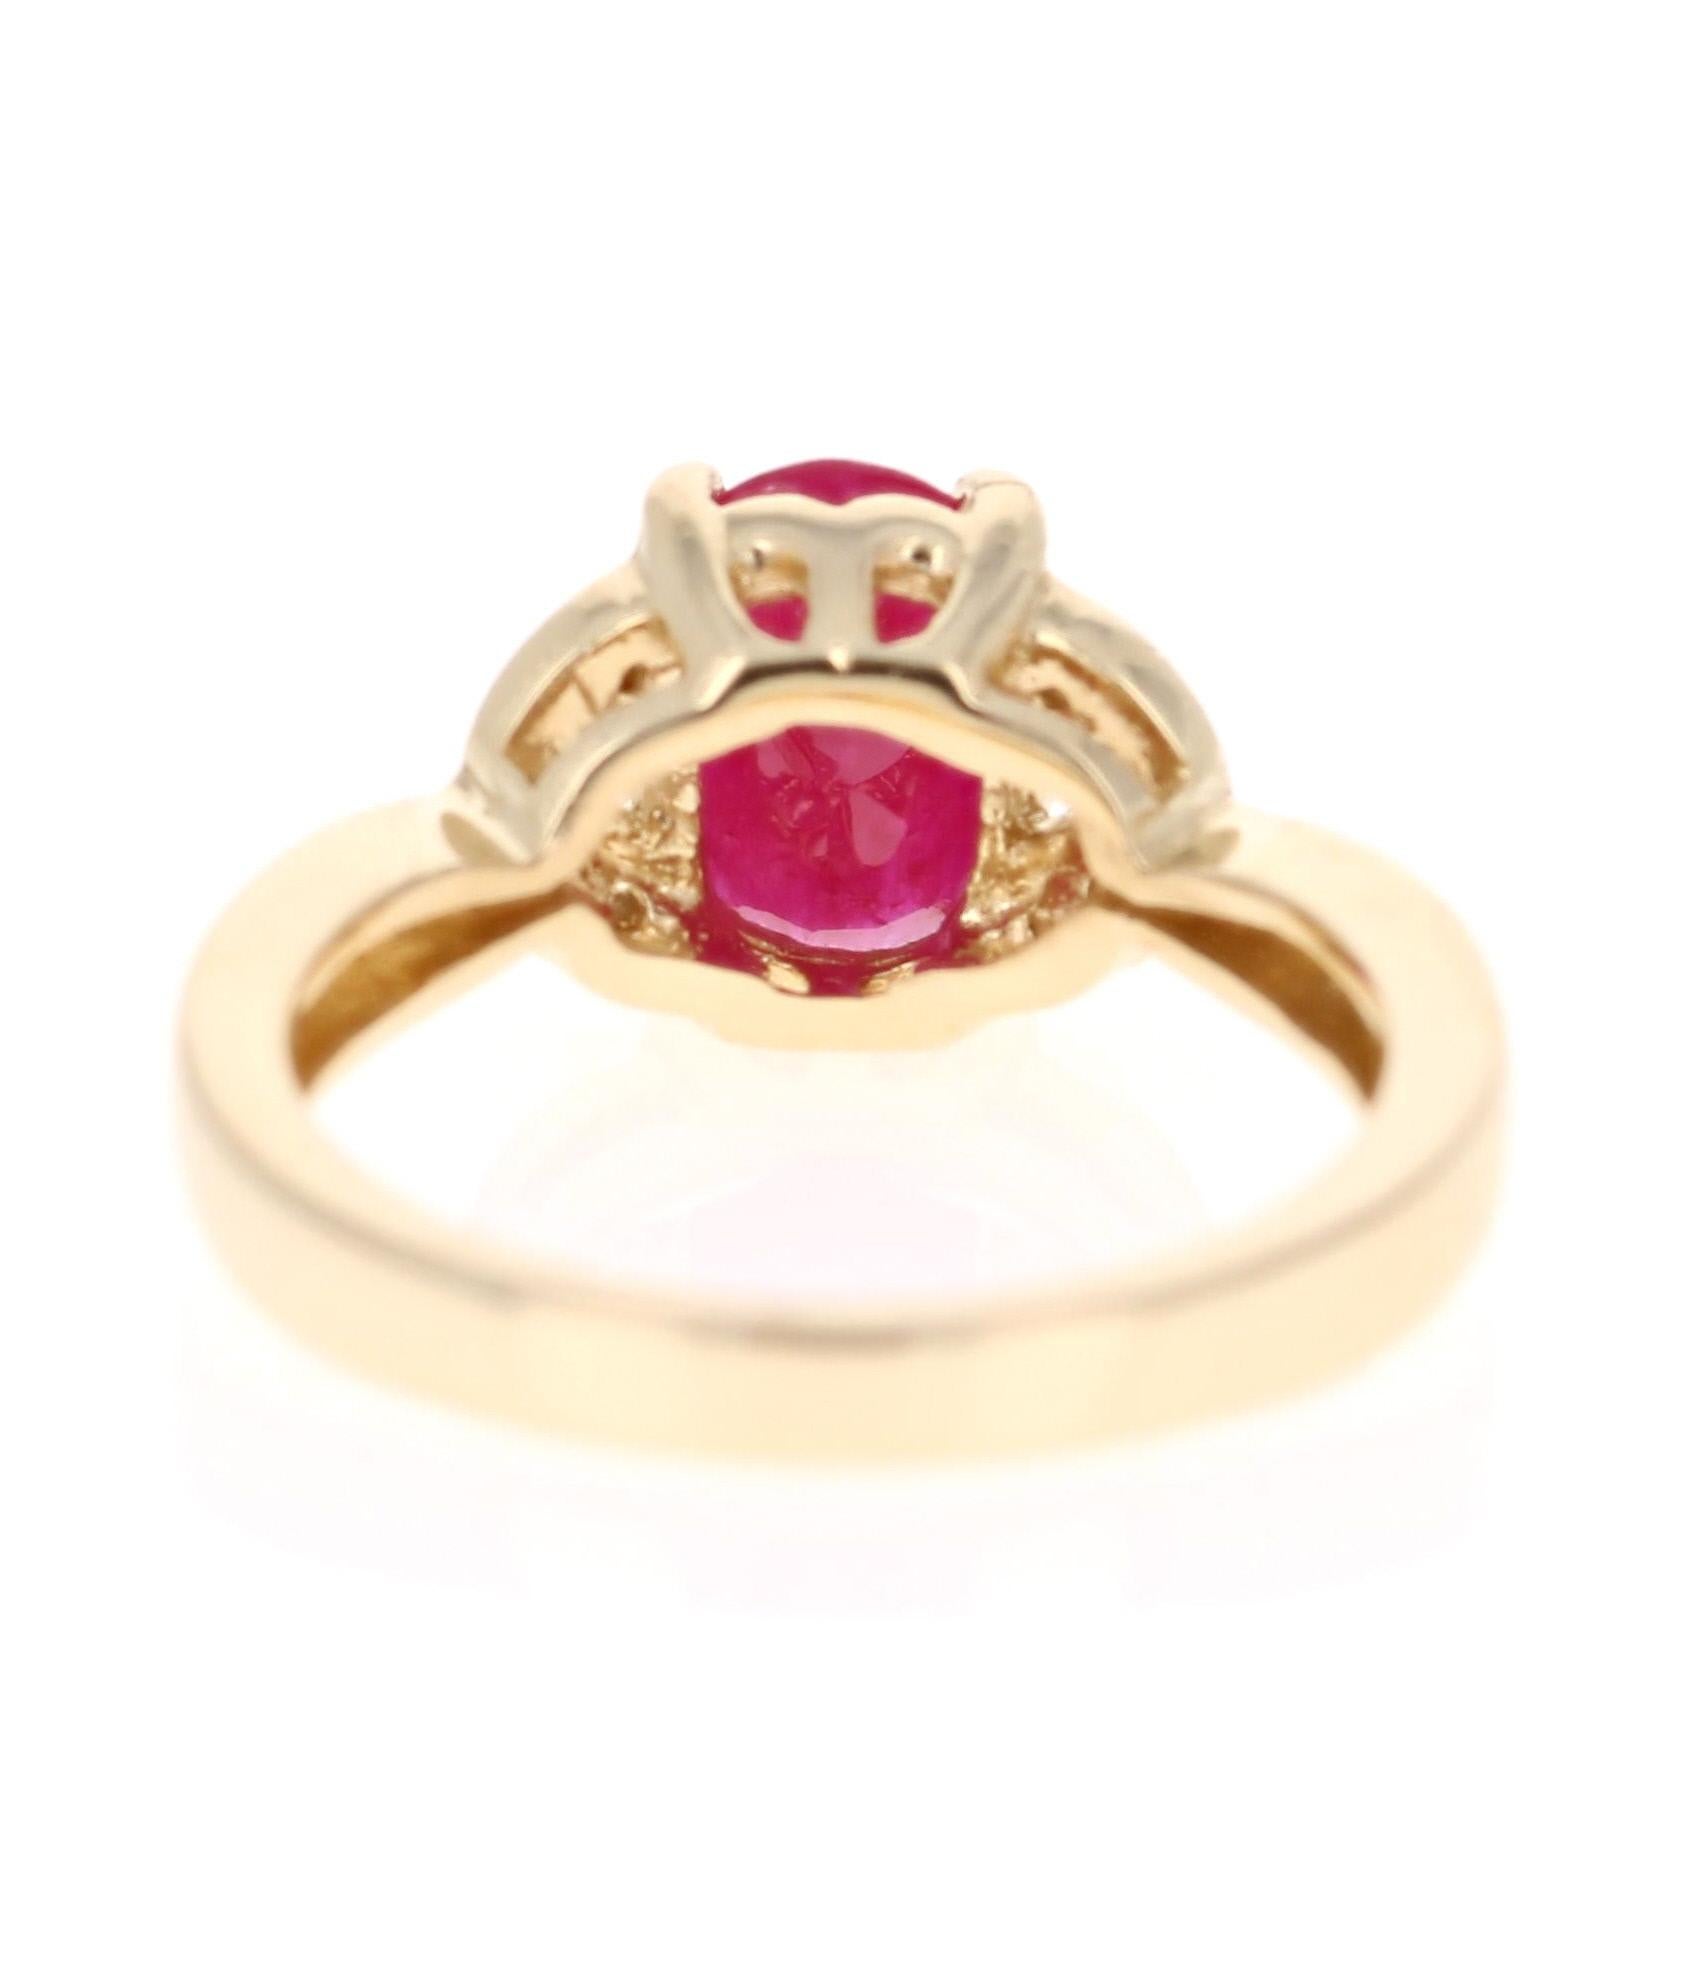 how much is a 14k gold ruby ring worth